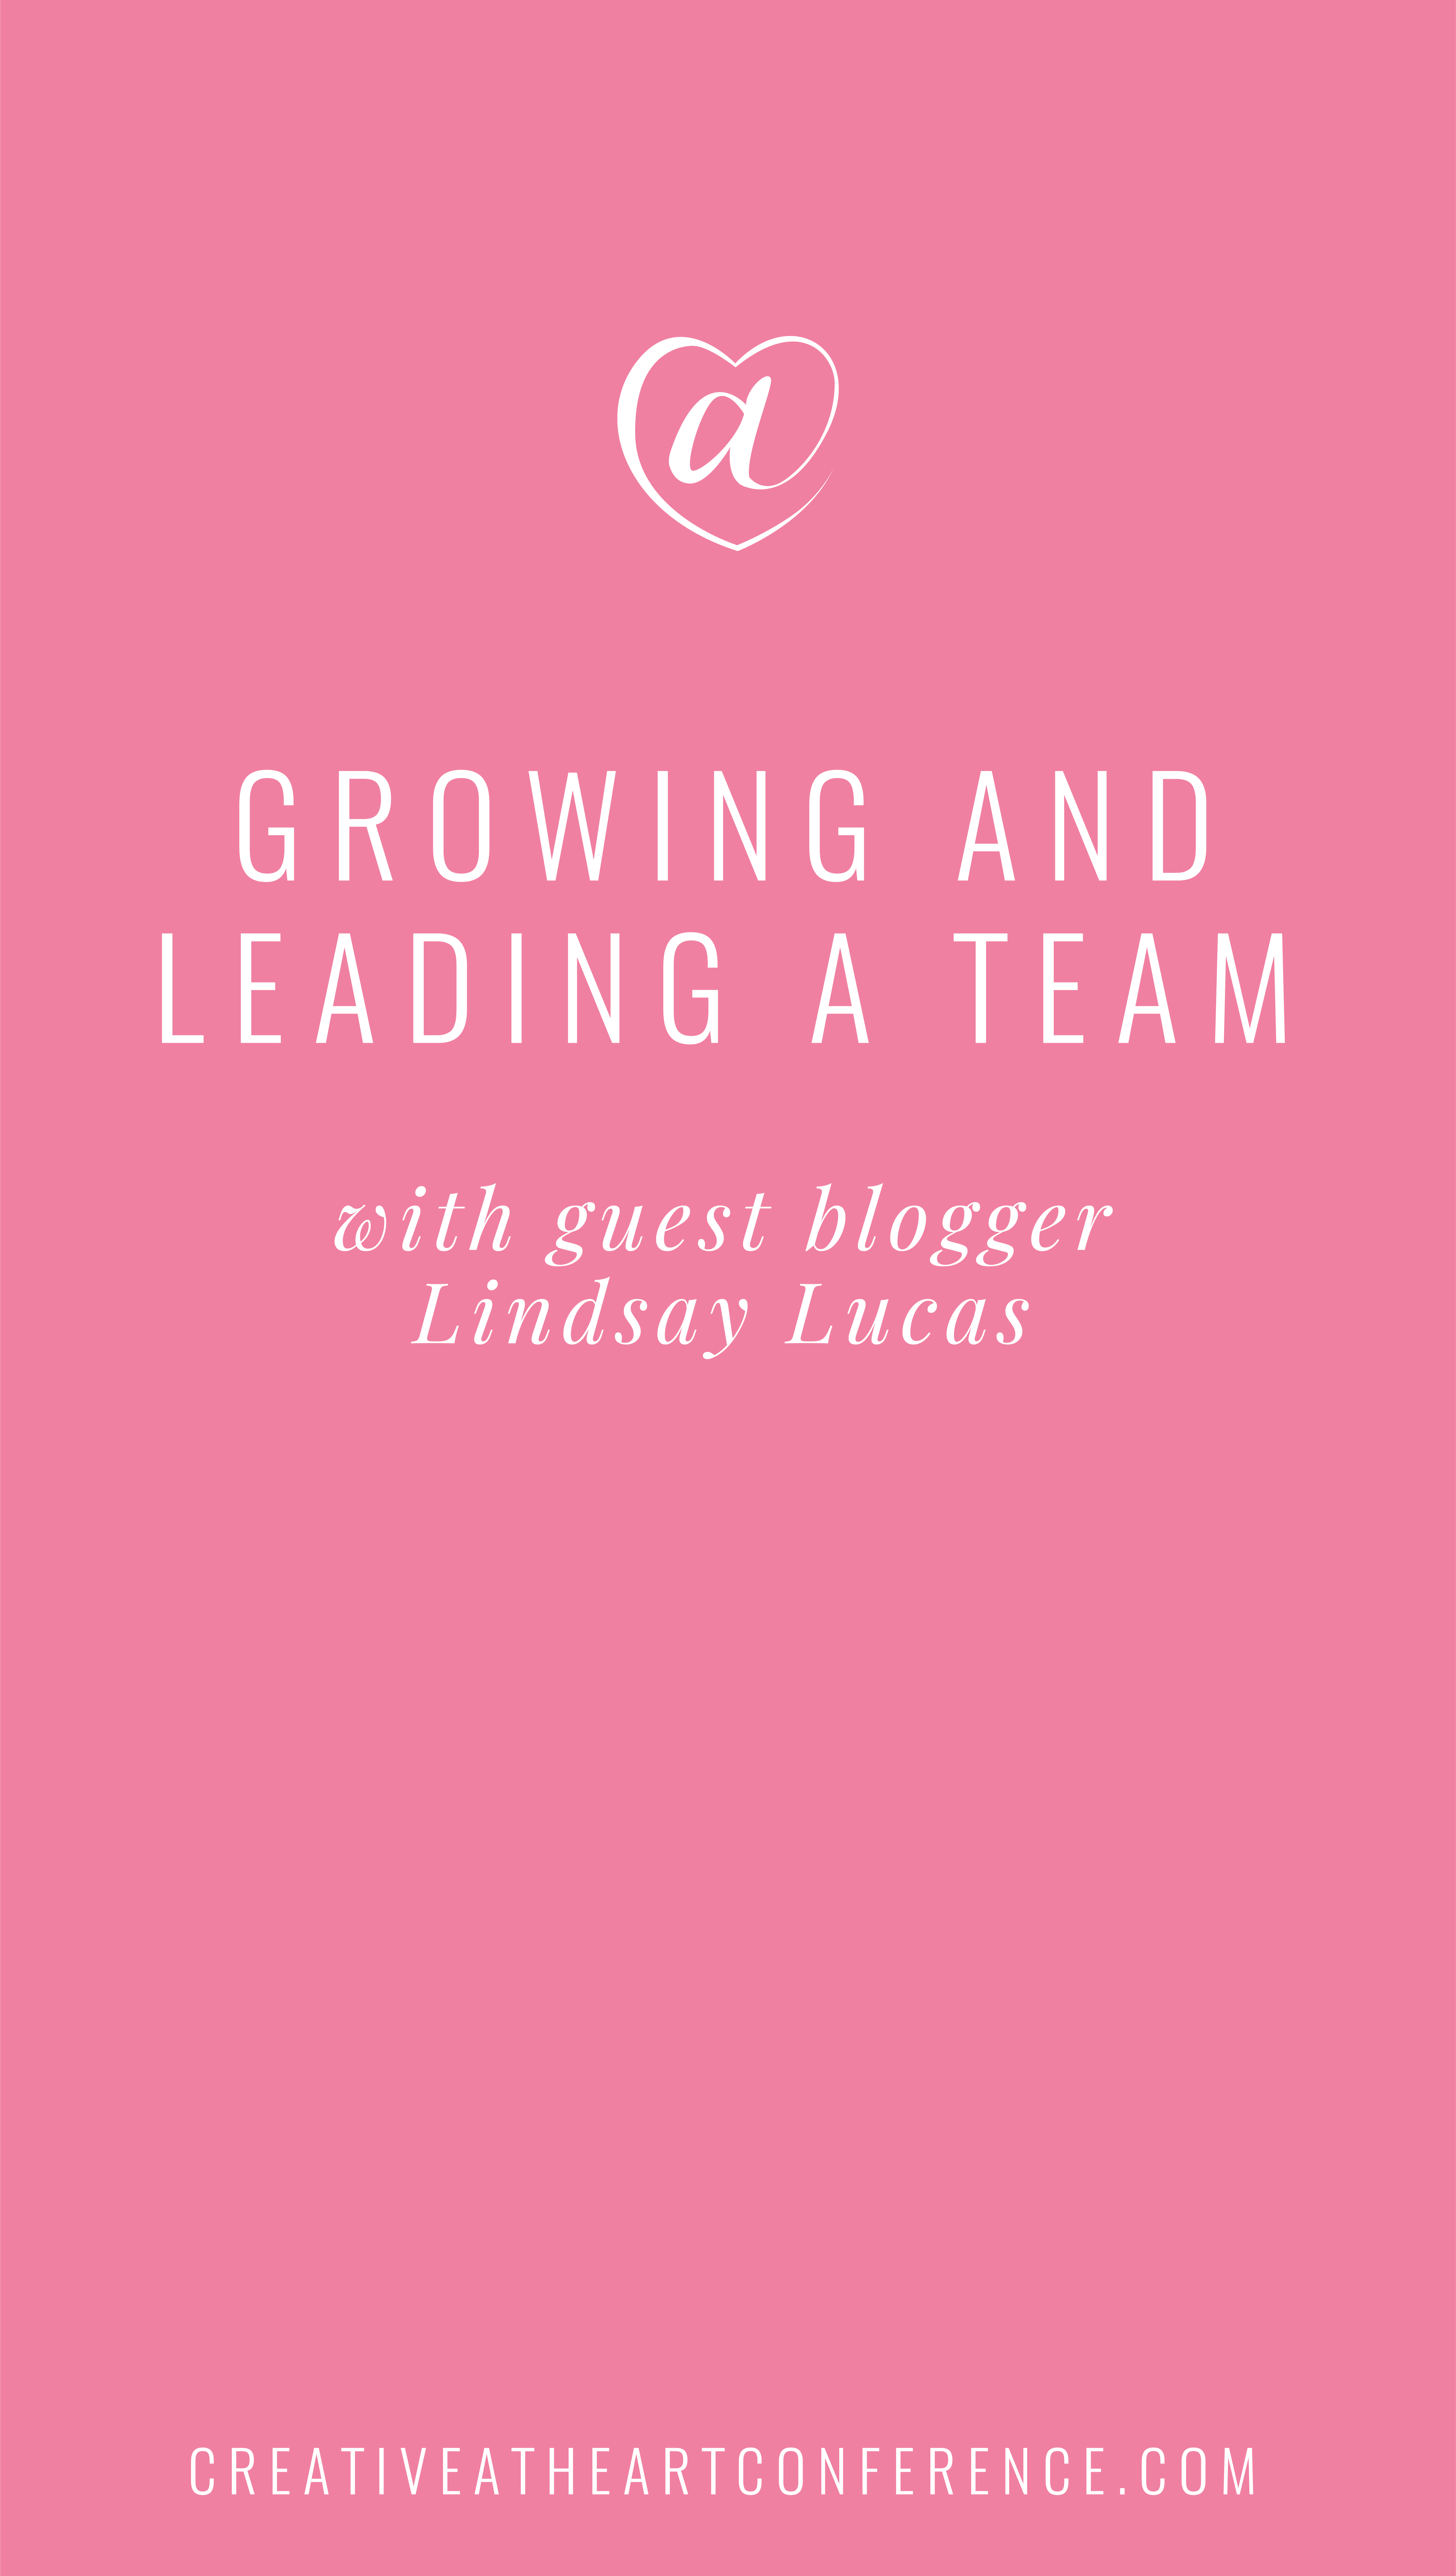  Growing & Leading a Team // Creative at Heart #teambuilding #leadership #creativeatheart #smallbusiness #outsourcing